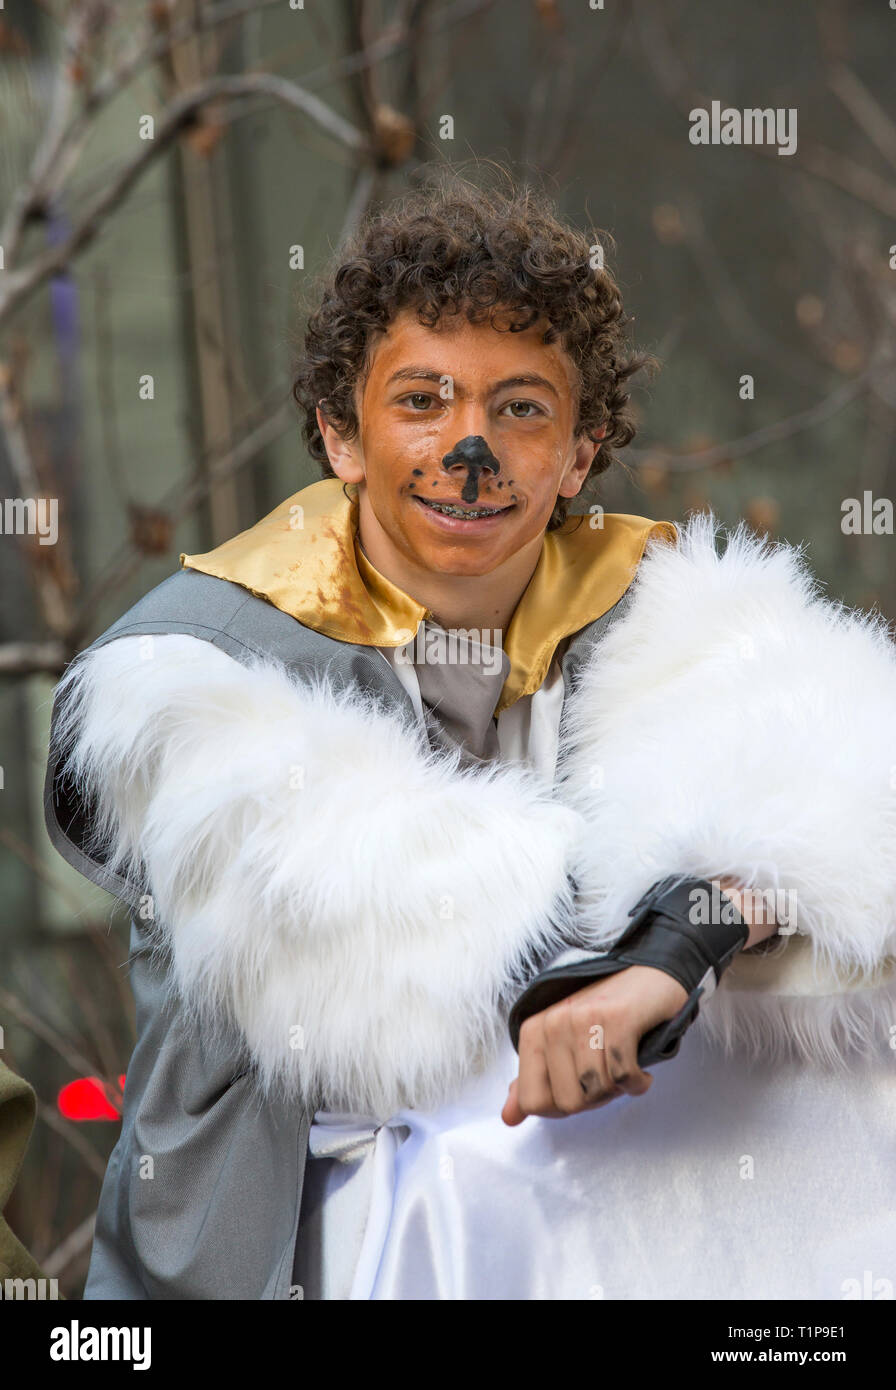 Young man with dog face makeup in costume for annual Chinese New Year Parade in San Francisco, California, USA Stock Photo